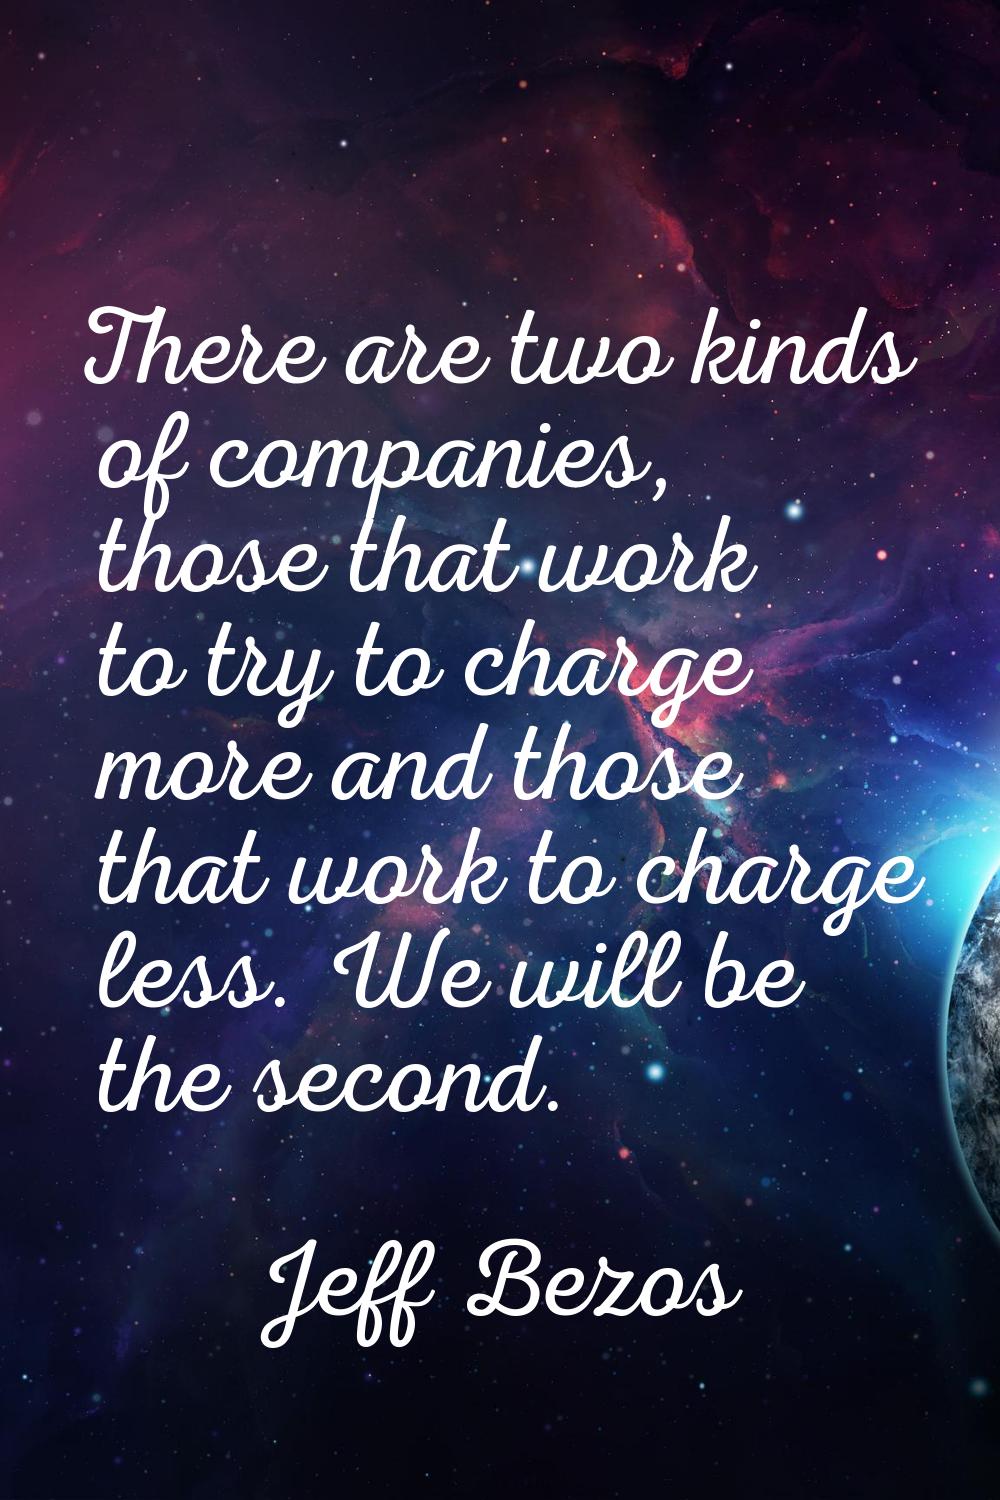 There are two kinds of companies, those that work to try to charge more and those that work to char